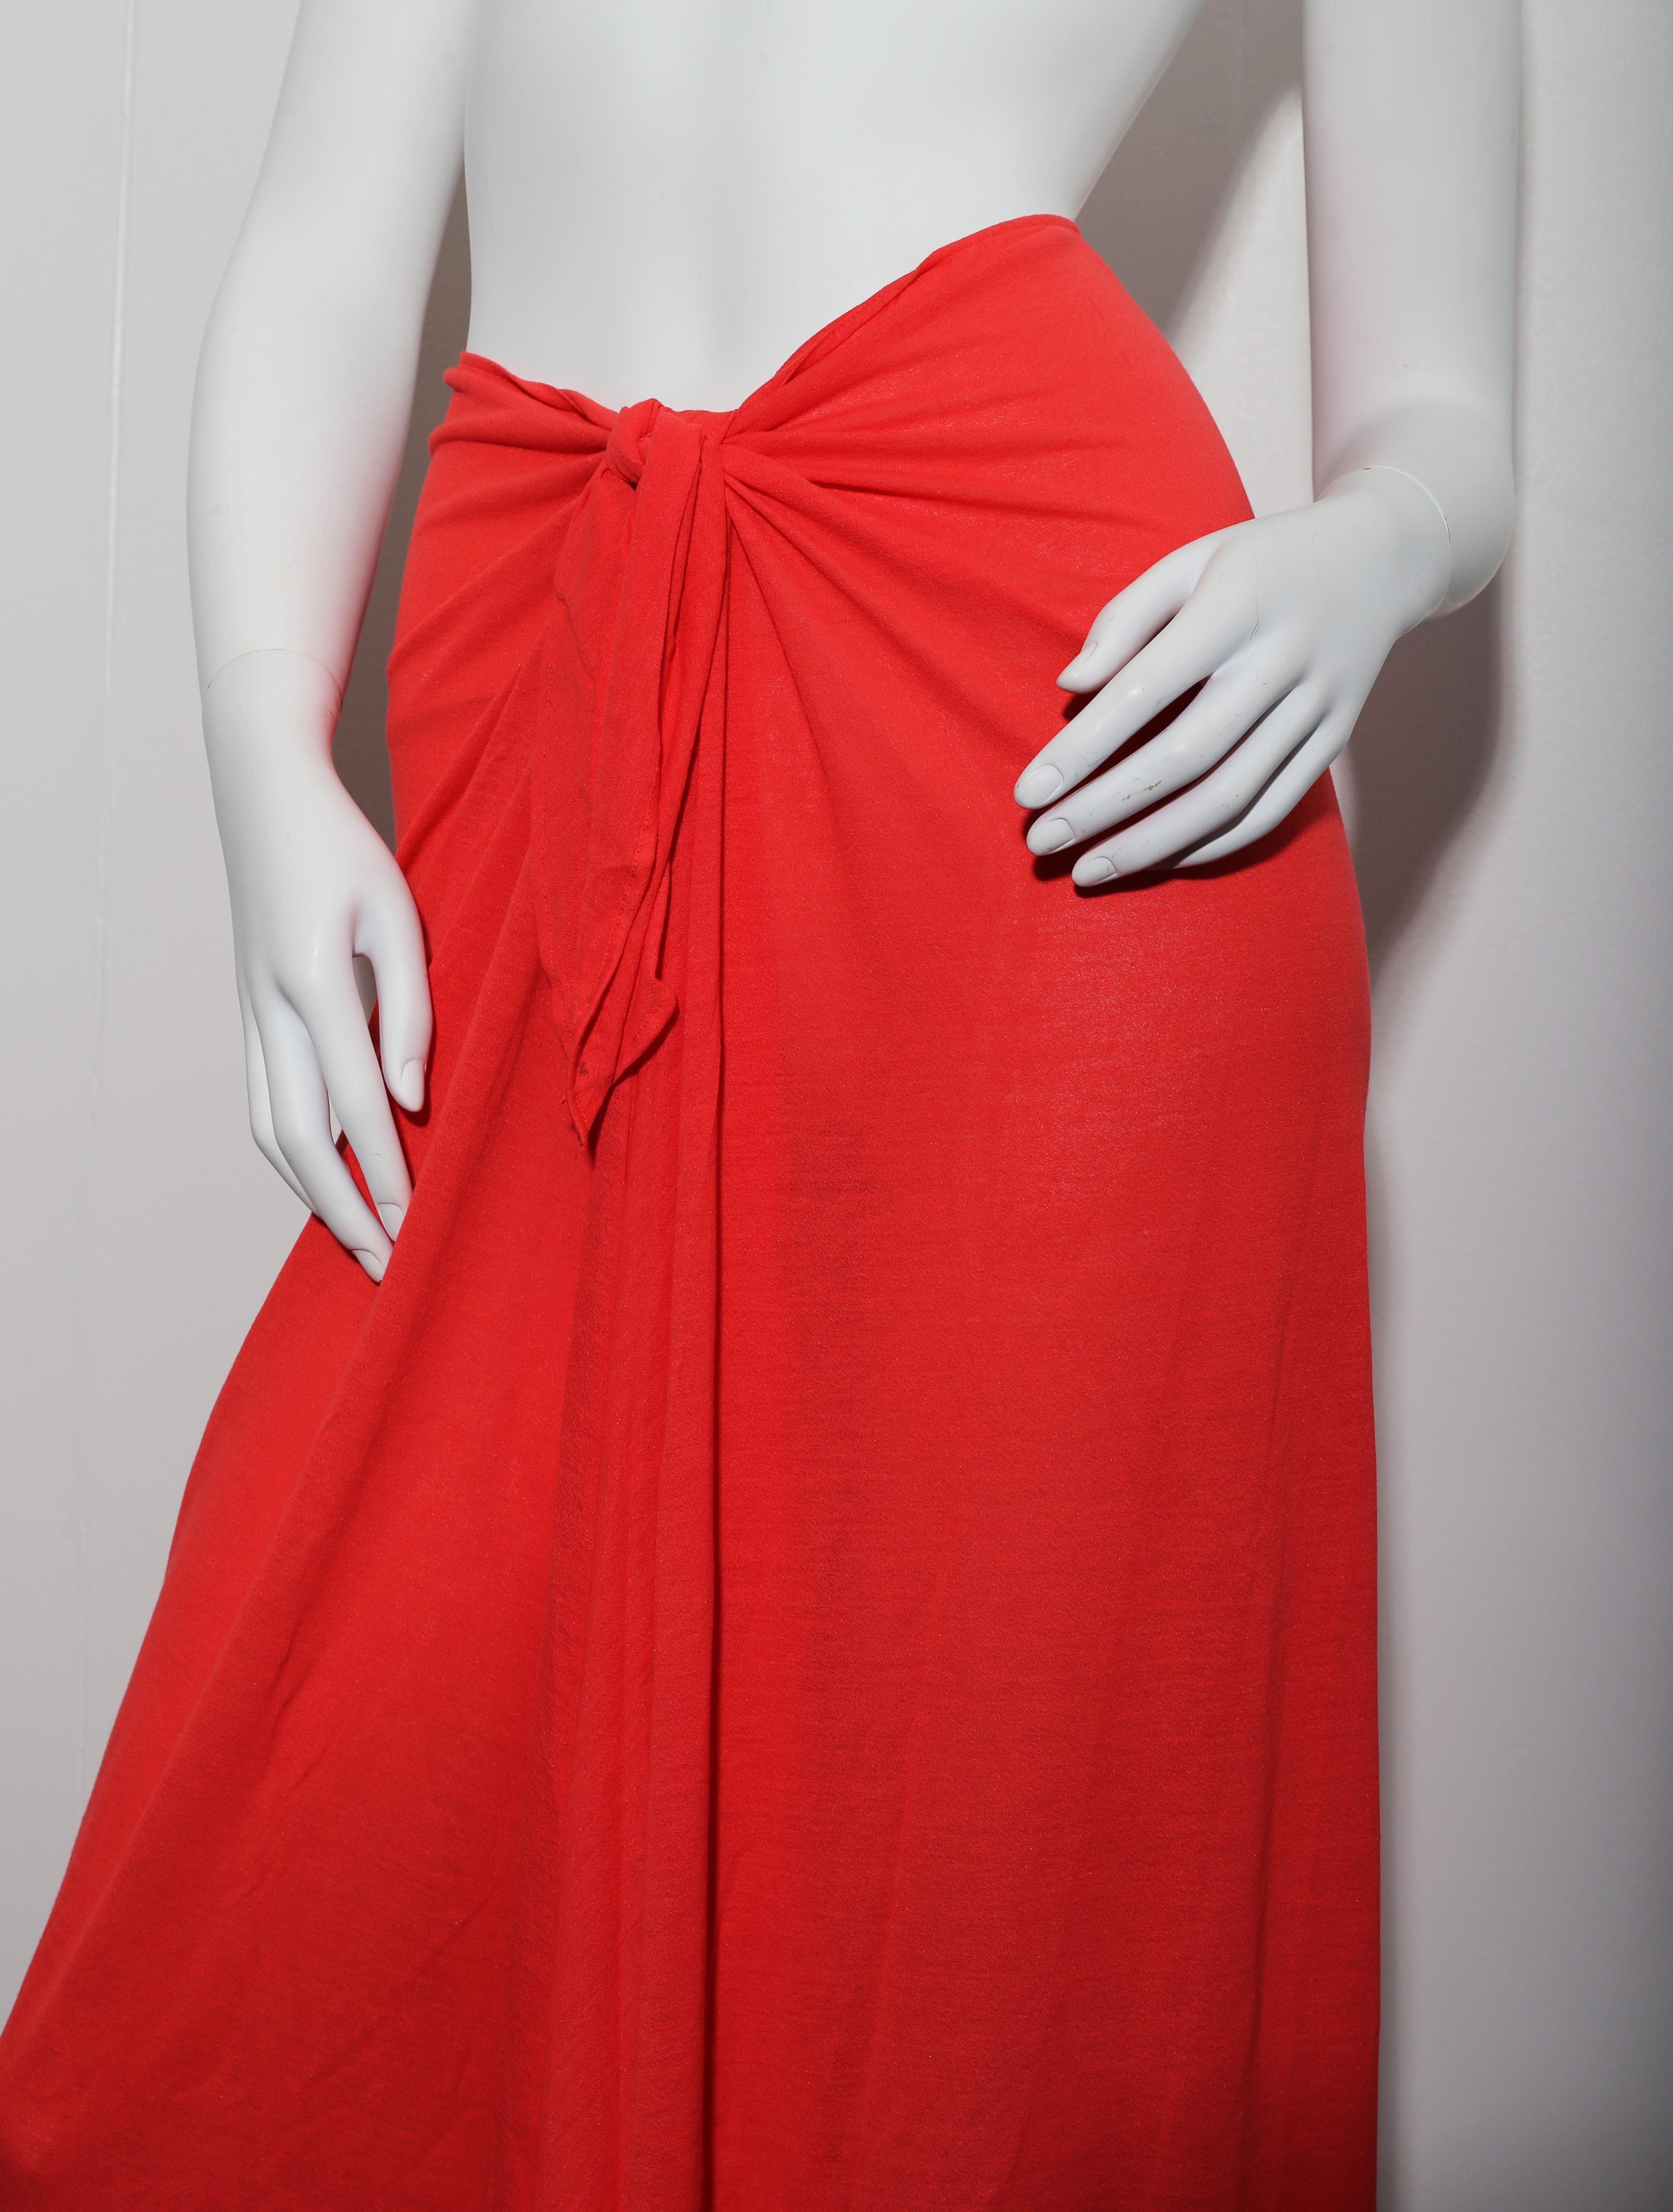 Red  Long  pareo from Eres featuring side tie fastening, straight hem and toe-length. 
Material:   82 % rayon, 18% poliamide 
Size  France 1 US Medium 

Orders welcome!!  all goods are insured and we package all purchases to a high standard.

Our